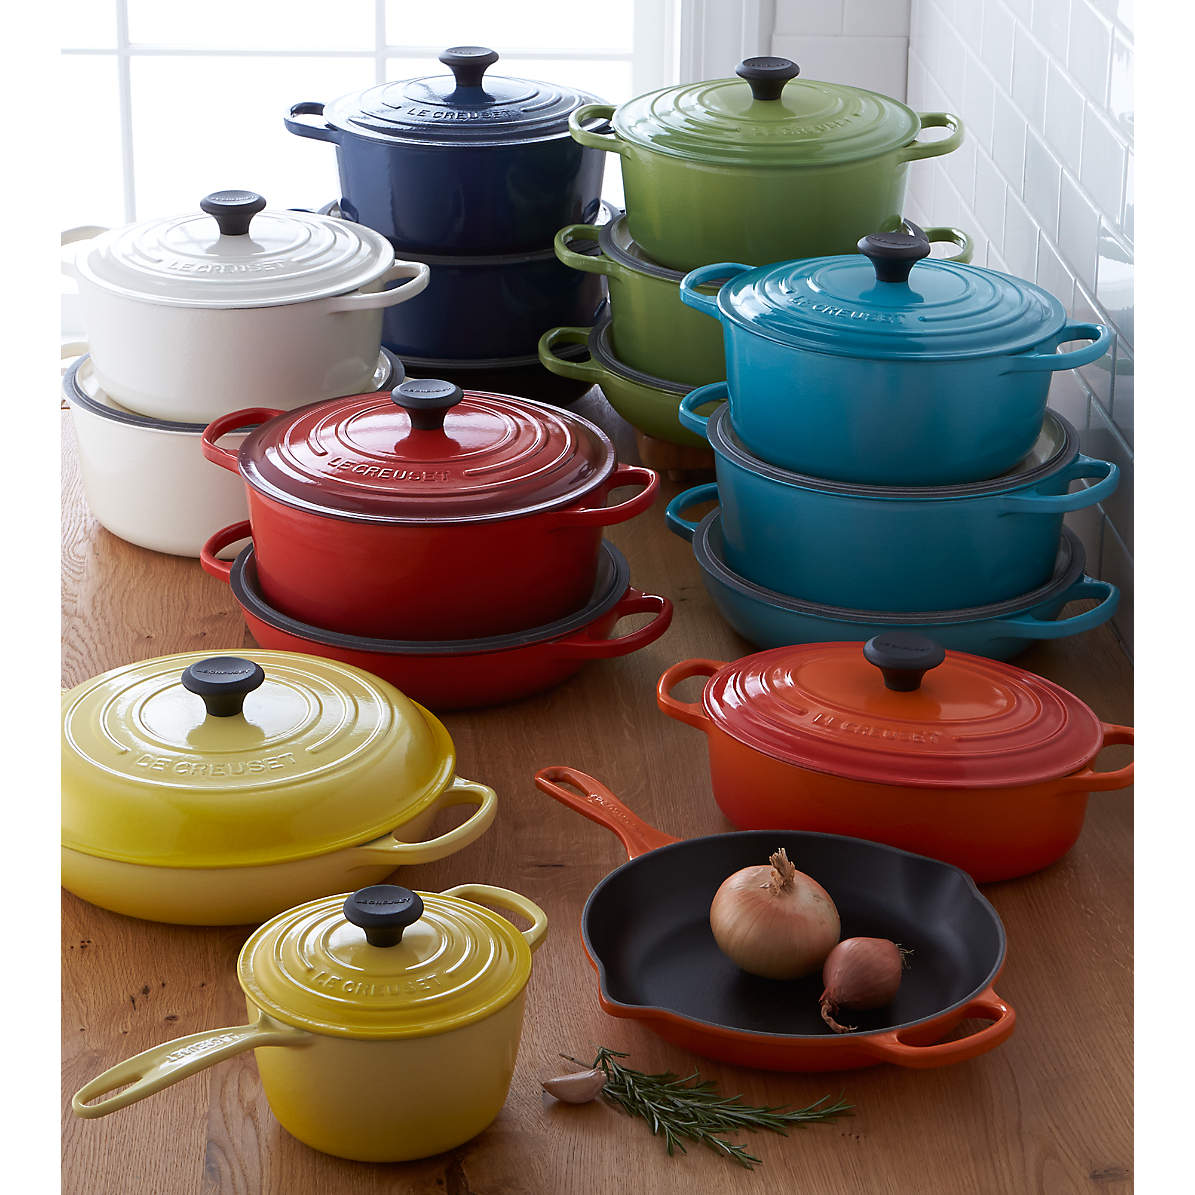 Le Creuset ~ Enameled Cast Iron ~ Cerise ~ 5 Piece Signature Set (5.5 qt.  Sig. RDO, 1.75 qt. Sig. Saucepan, 9 Sig. Skillet), Price $575.00 in  Madison, MS from Persnickety